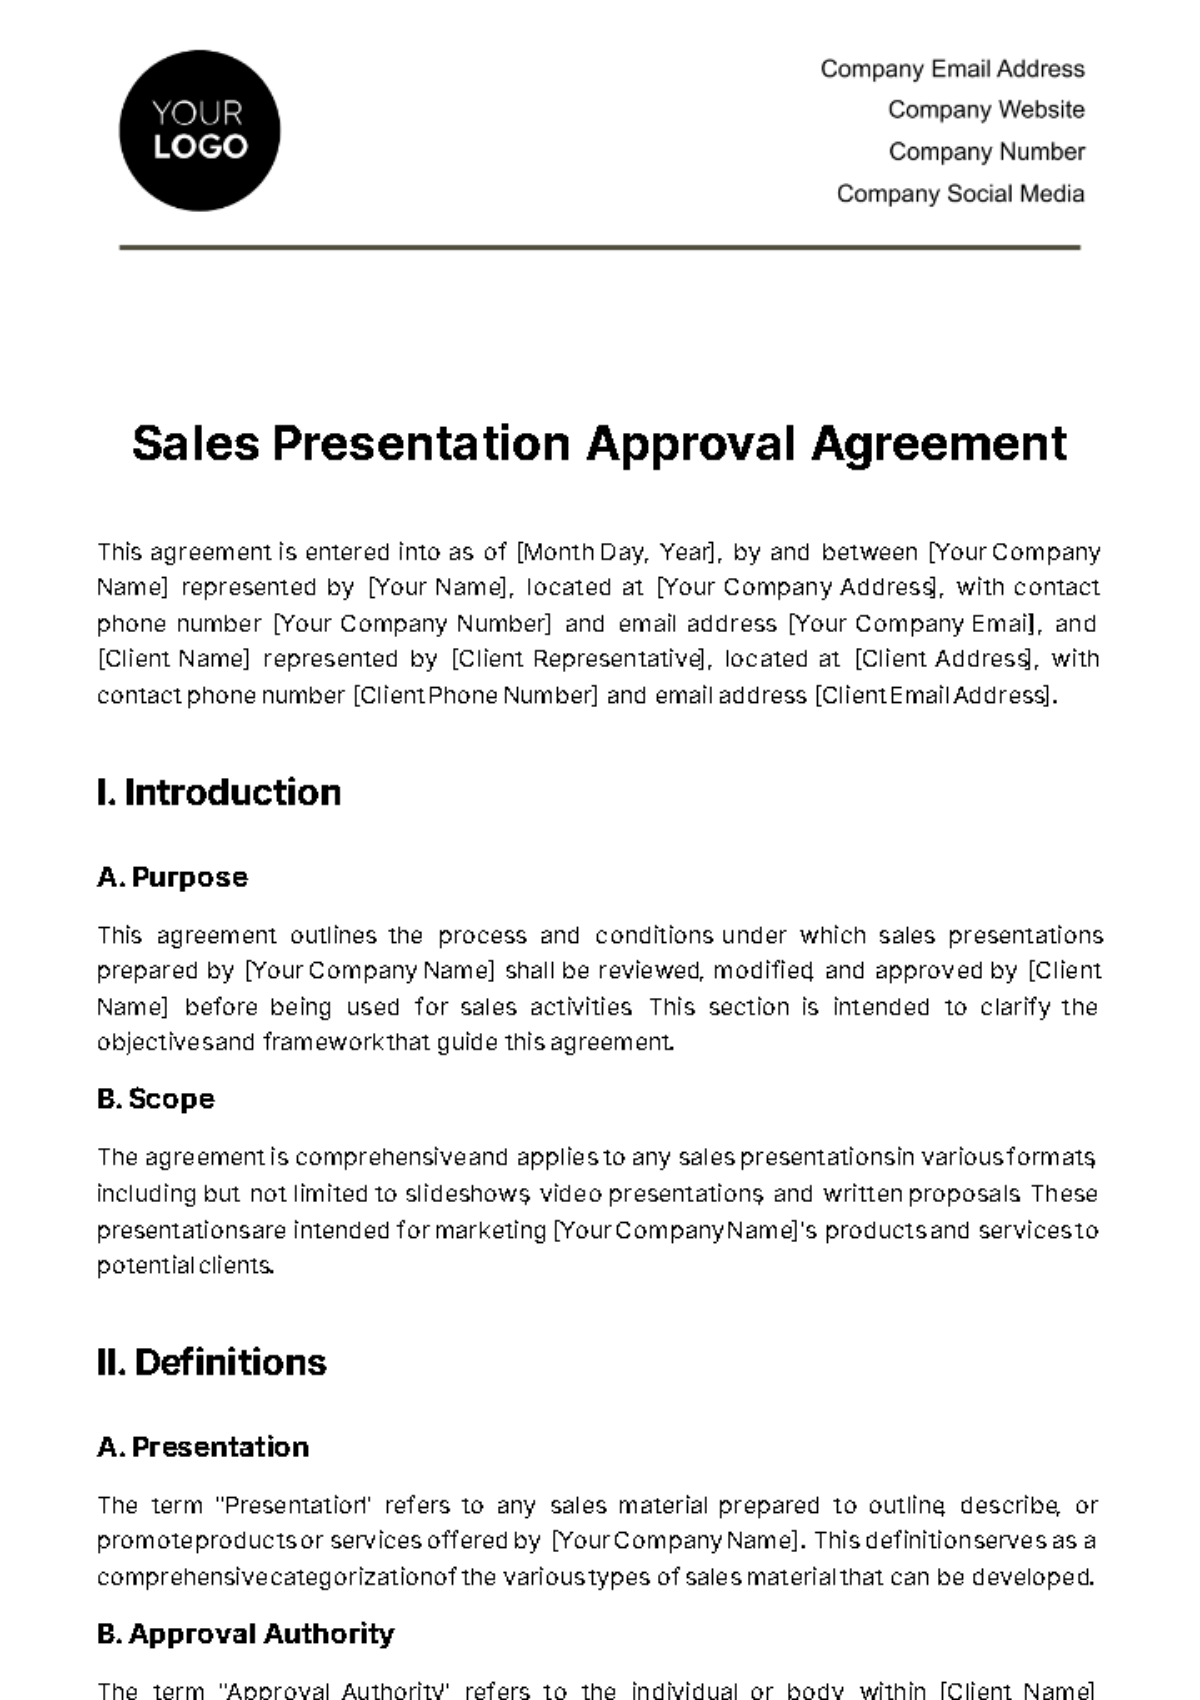 Free Sales Presentation Approval Agreement Template